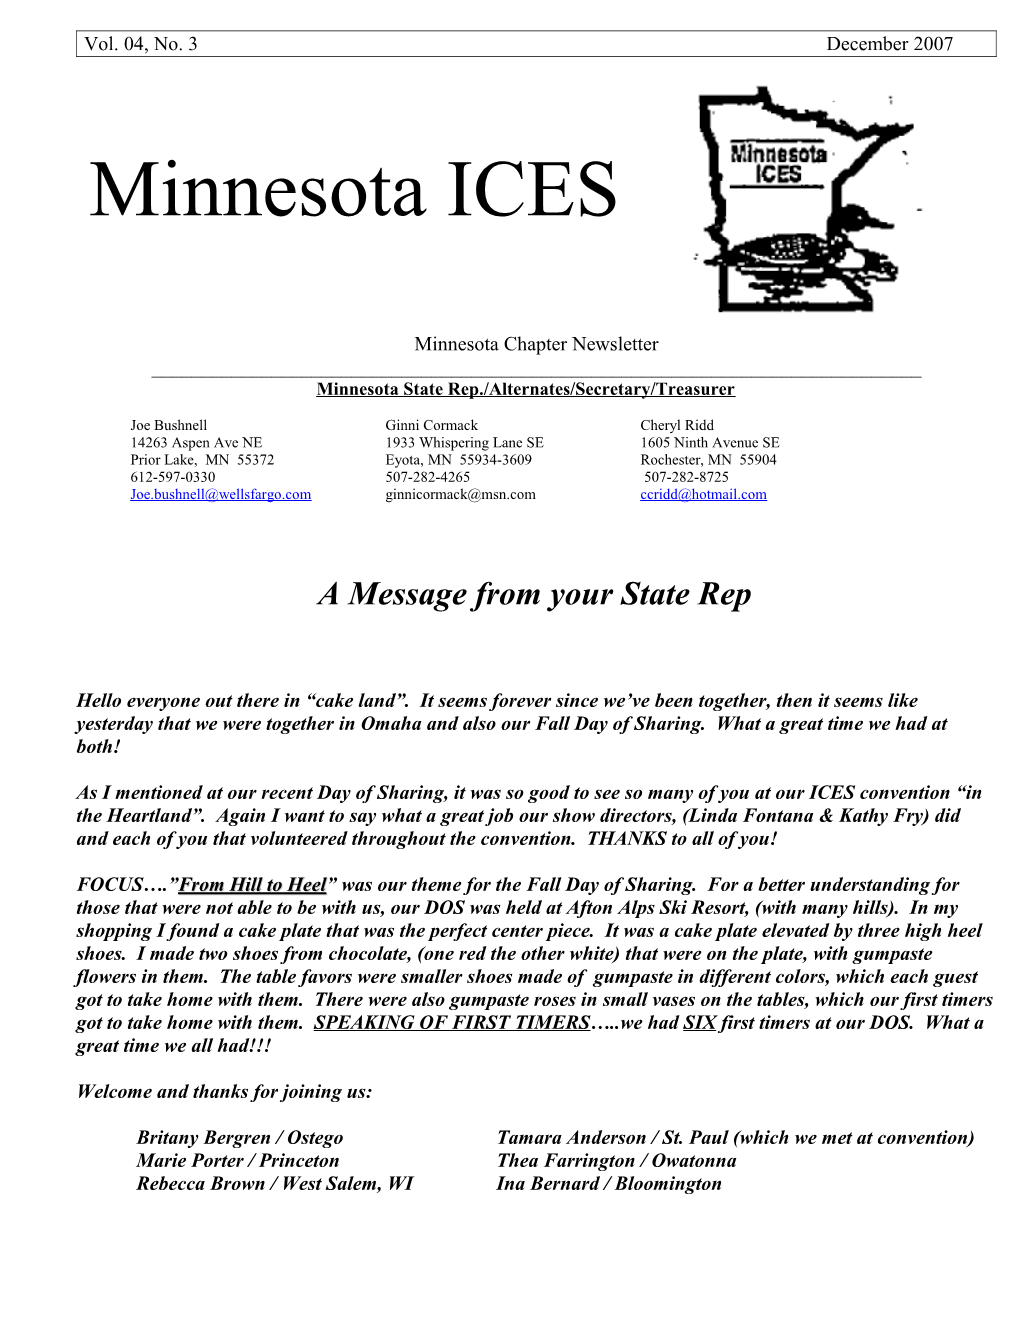 Greetings to All Minnesota ICES Members